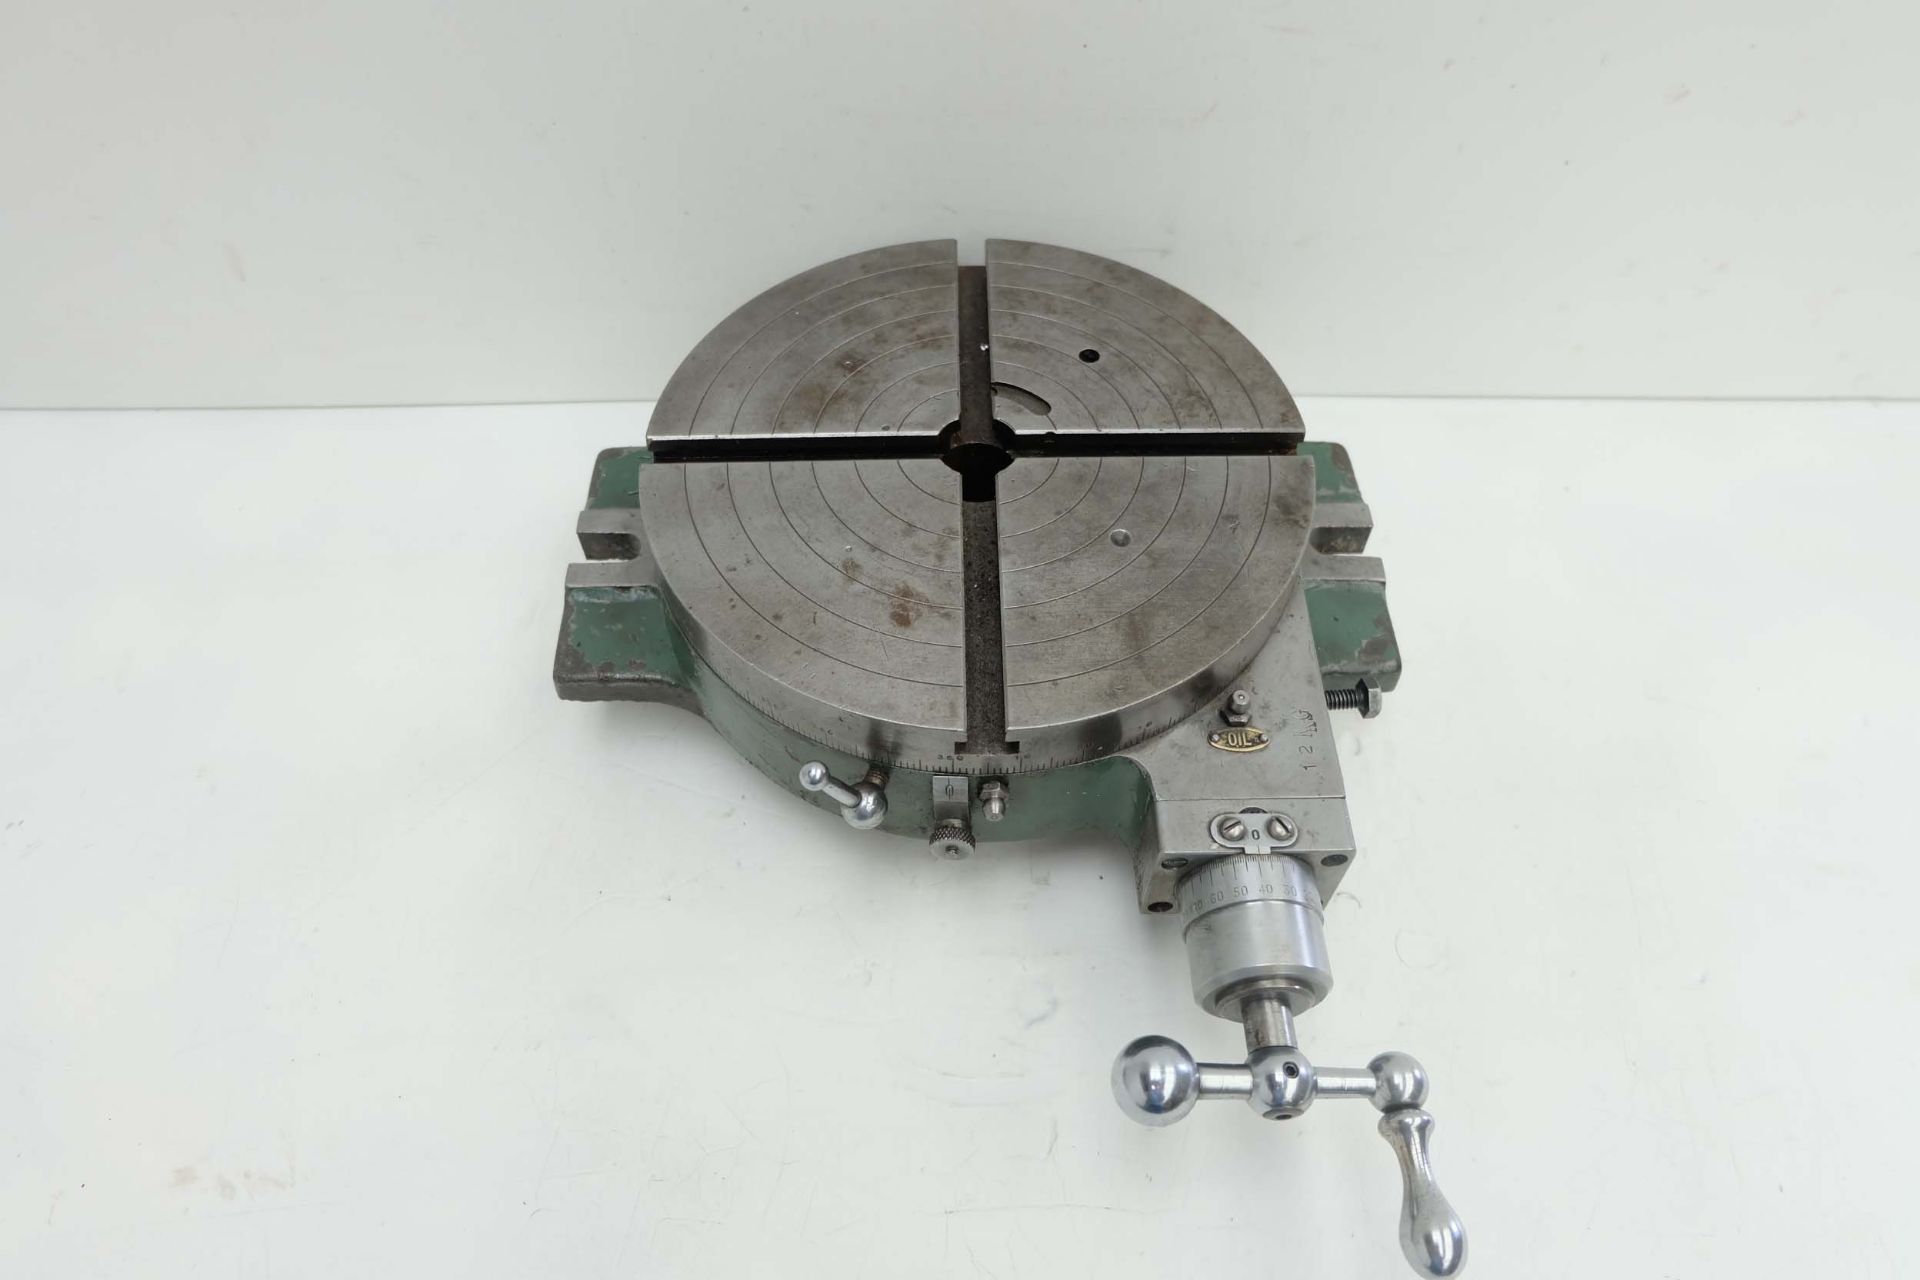 8" Diameter Rotary Table. Tee Slotted Table. Height 2 3/8" (60mm).